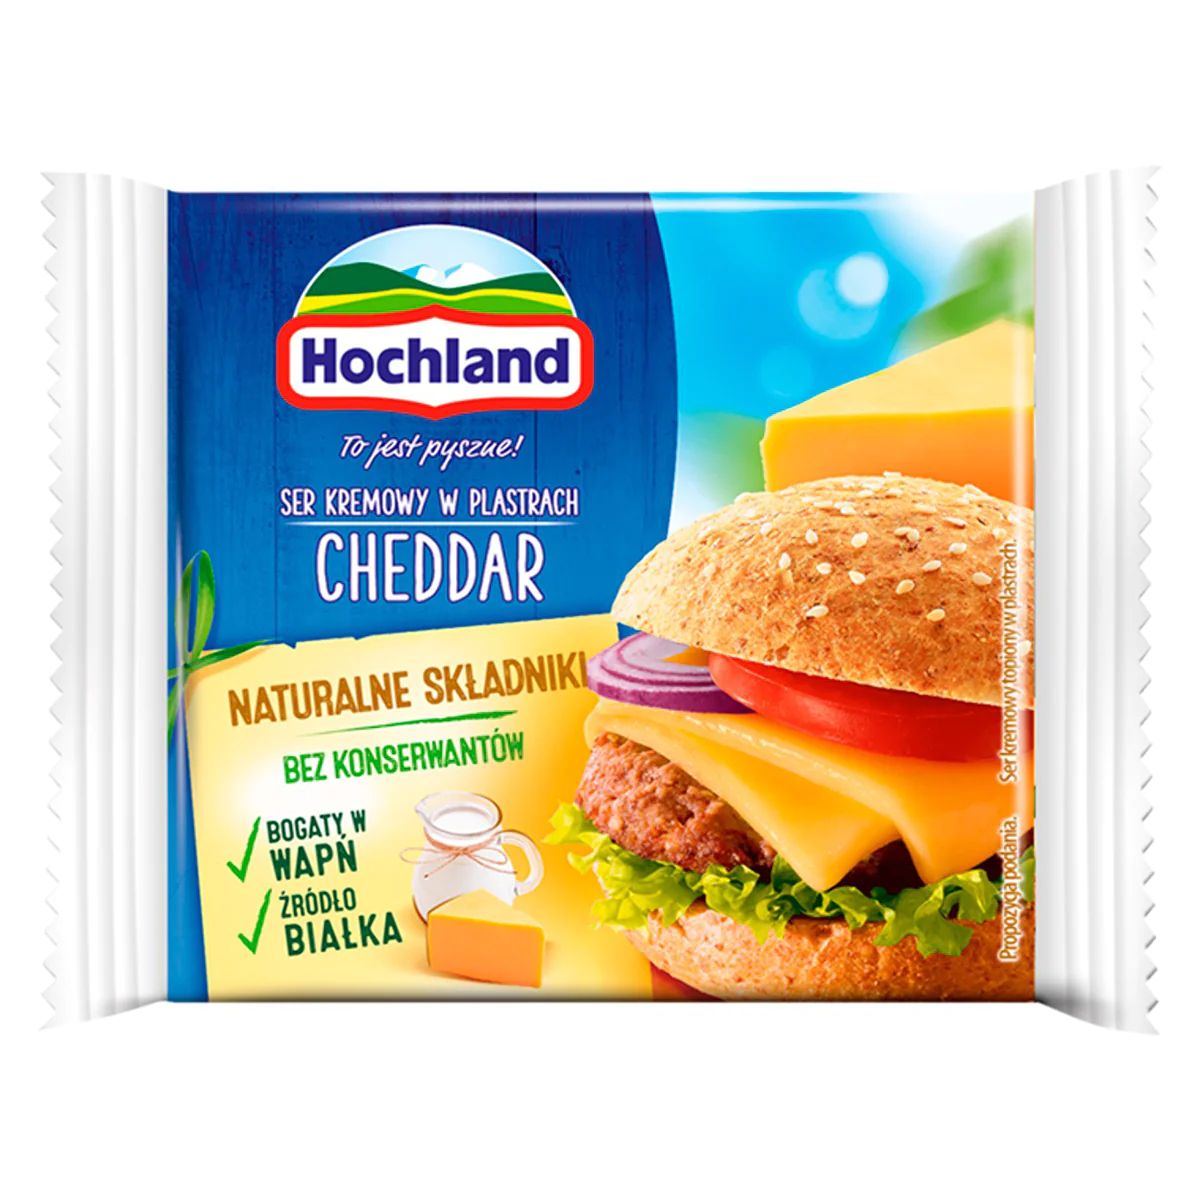 Packaging of Hochland - Cheddar Cheese - 130g slices with an illustration of a cheeseburger.